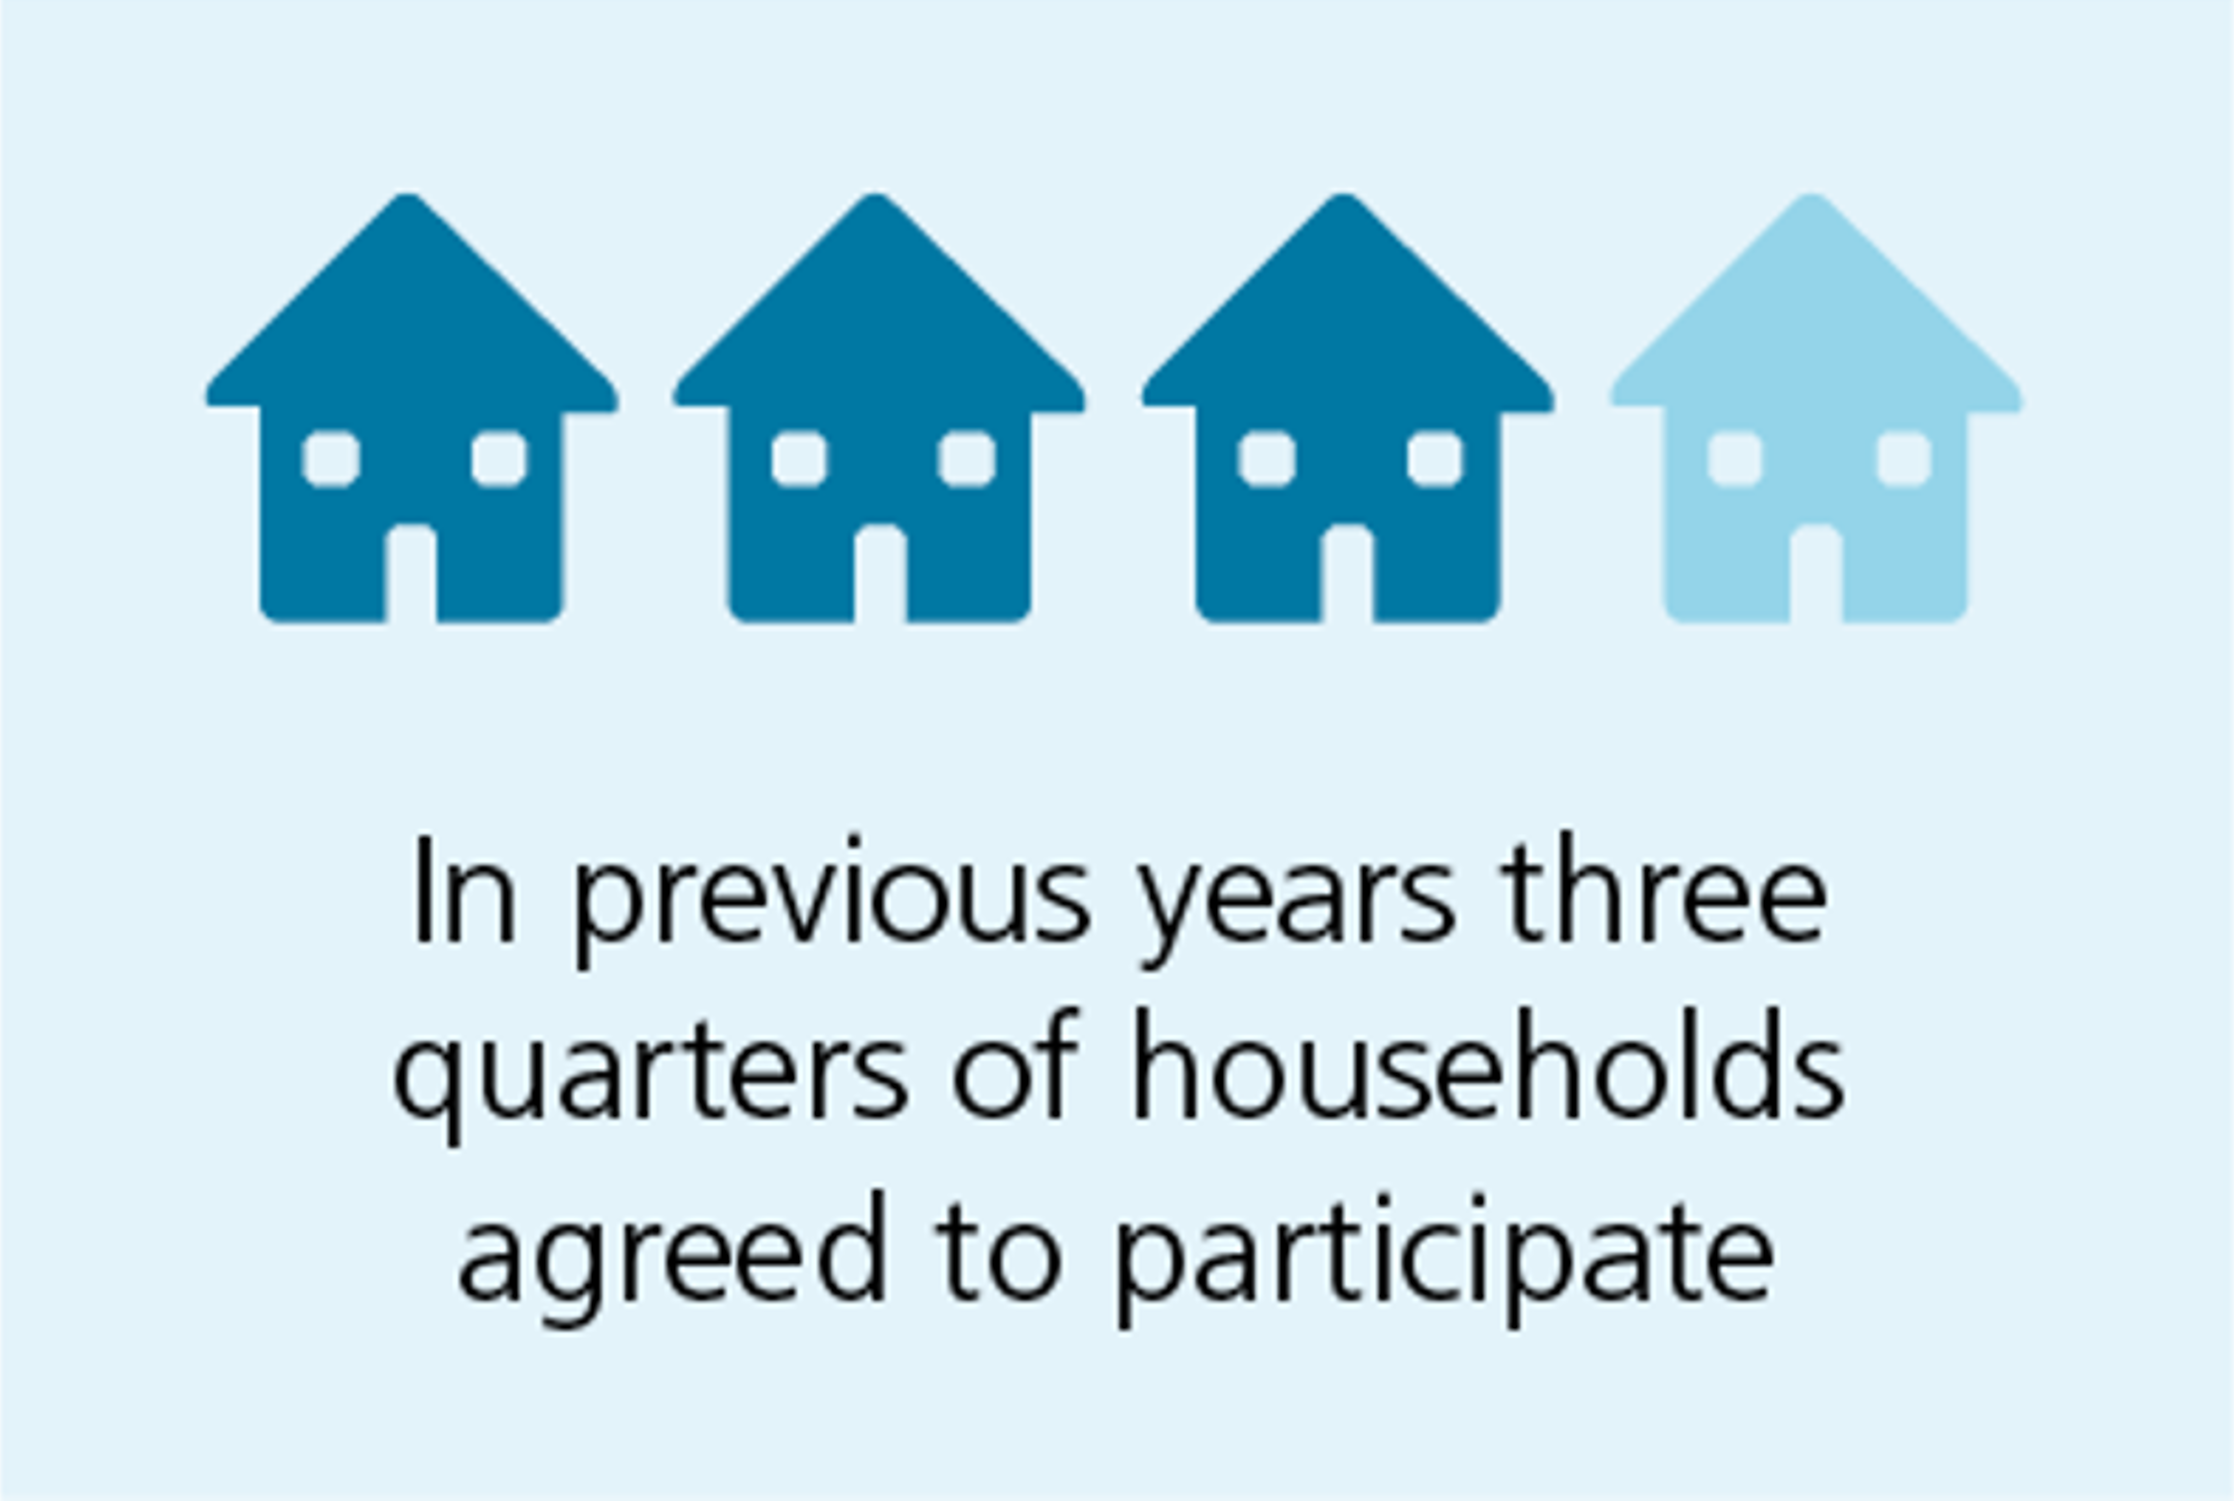 In previous years three quarters of households agreed to participate